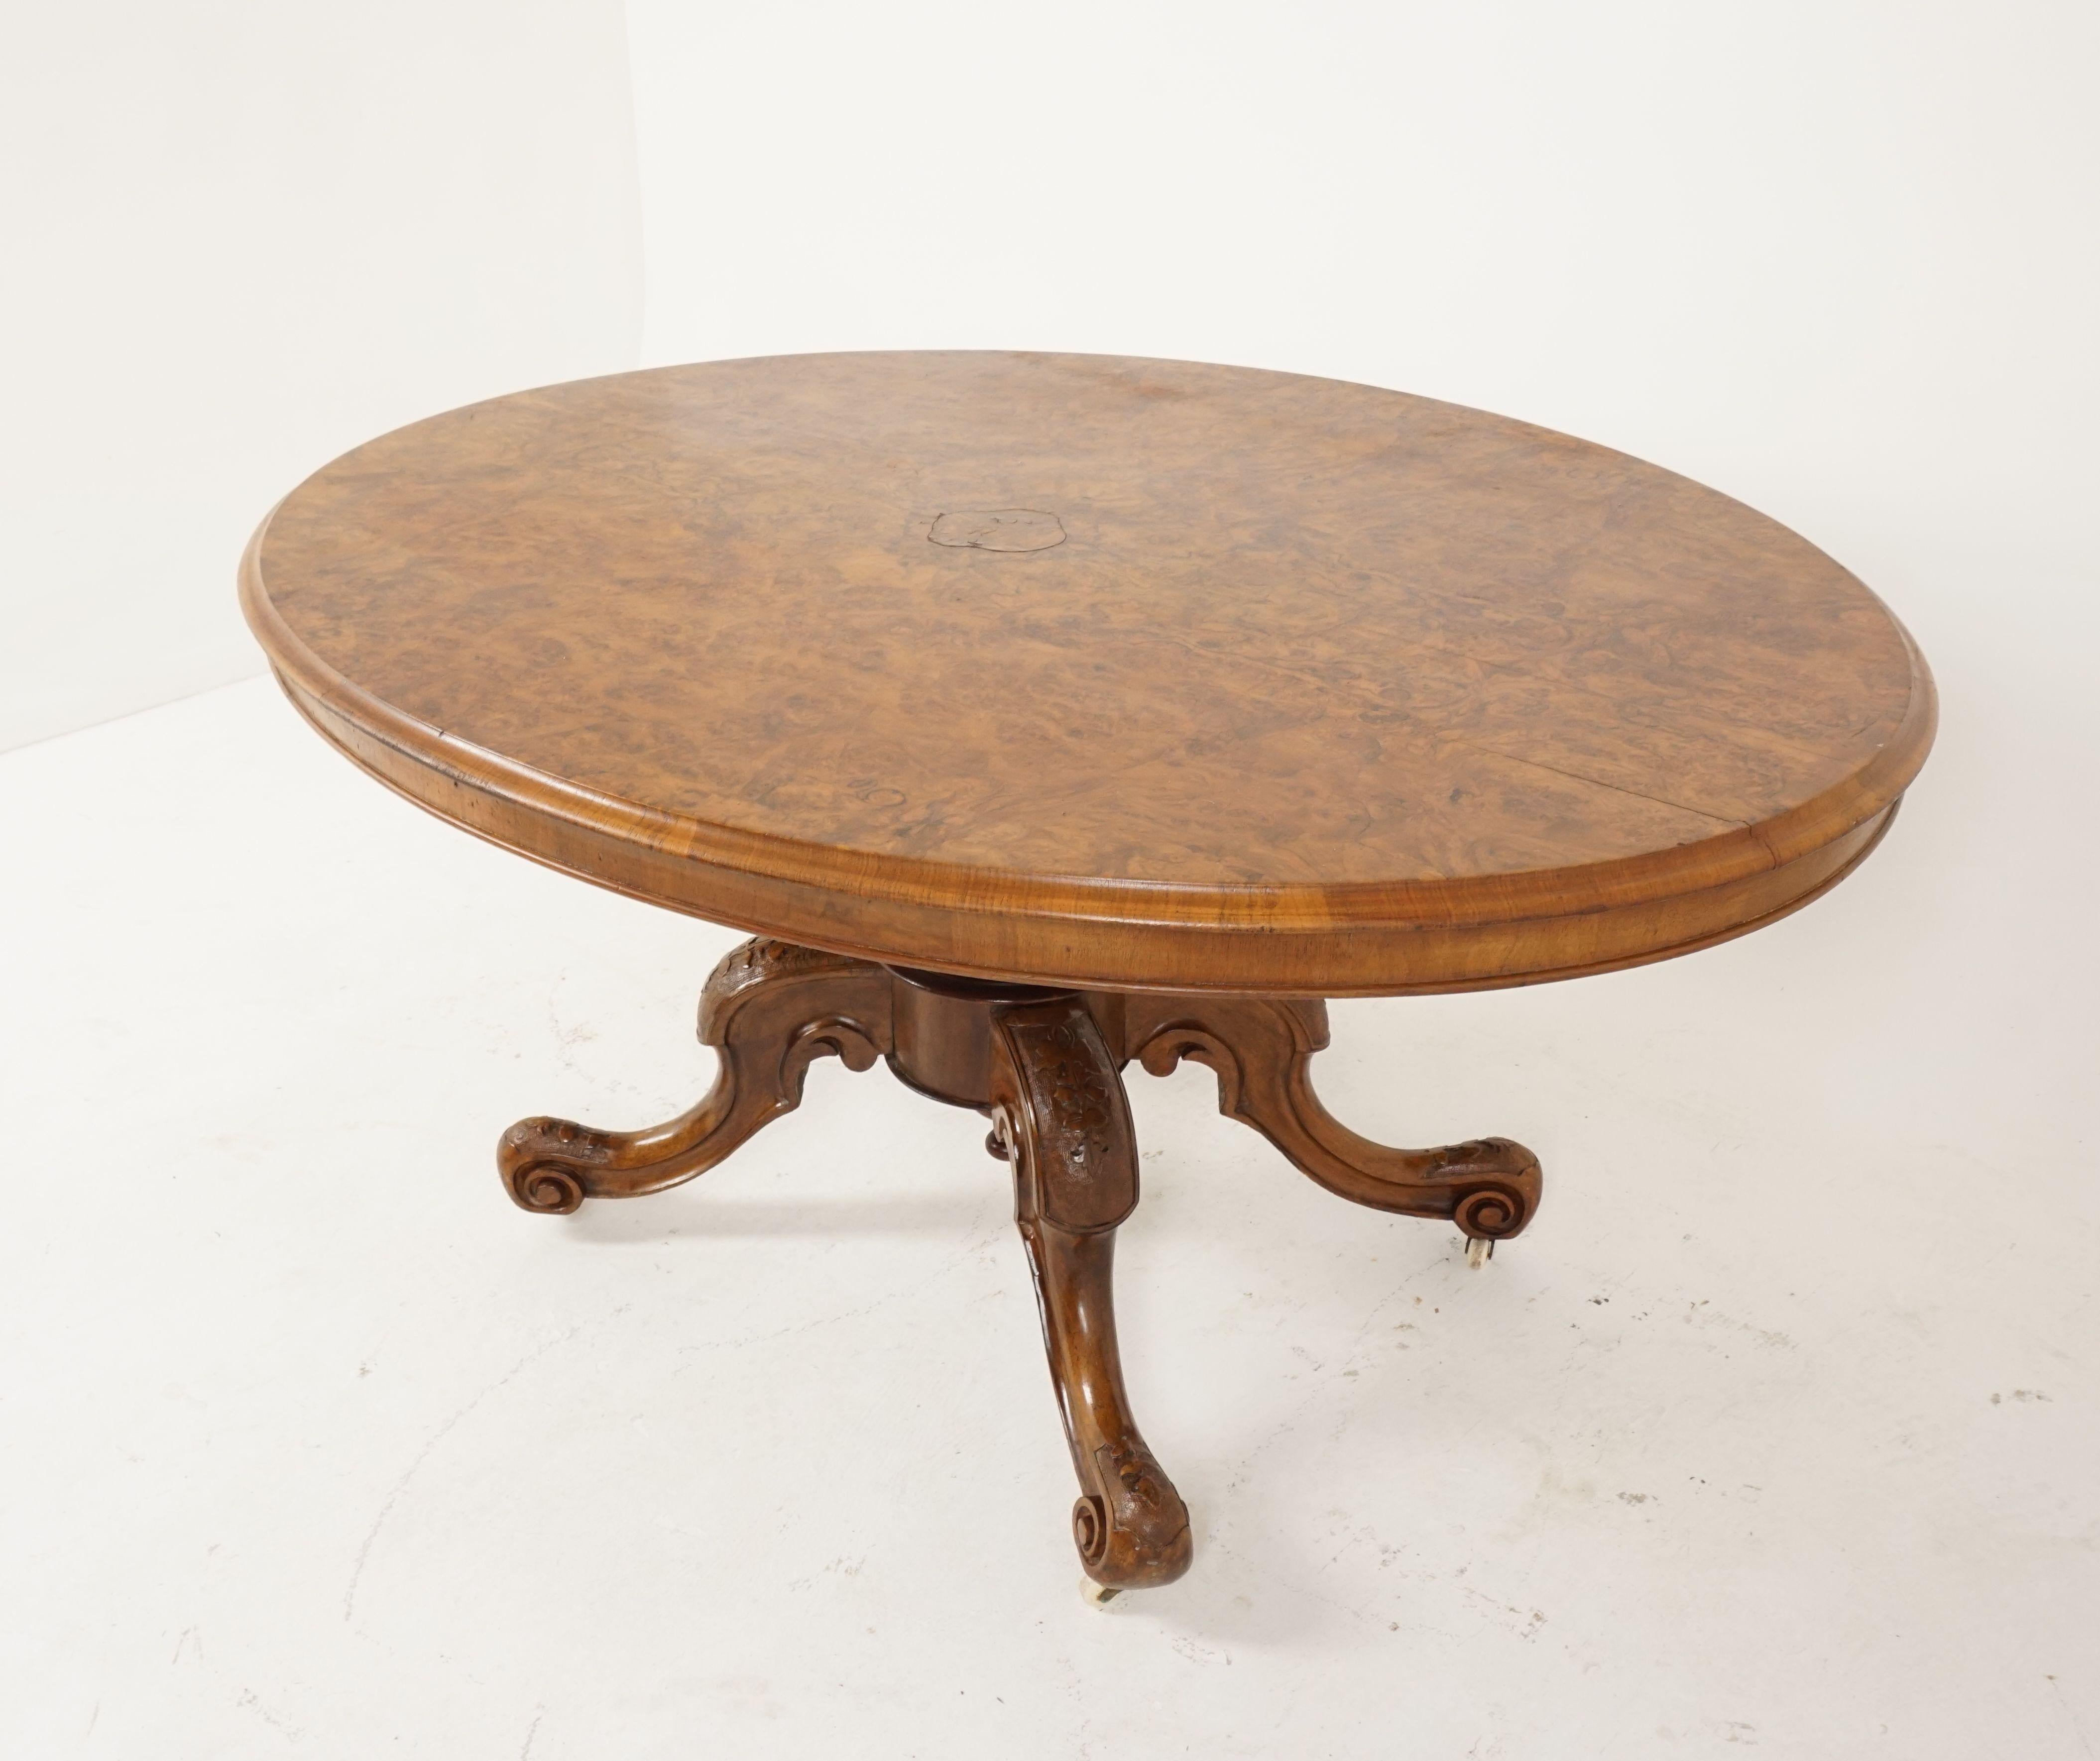 Antique Victorian burr walnut snap top loo table dining table, Scotland 1880, H121
Scotland, 1880
Solid walnut and burr walnut veneer
Original finish
tabletop has a moulded edge with a wonderful burr walnut top
tabletop is supported by a lovely